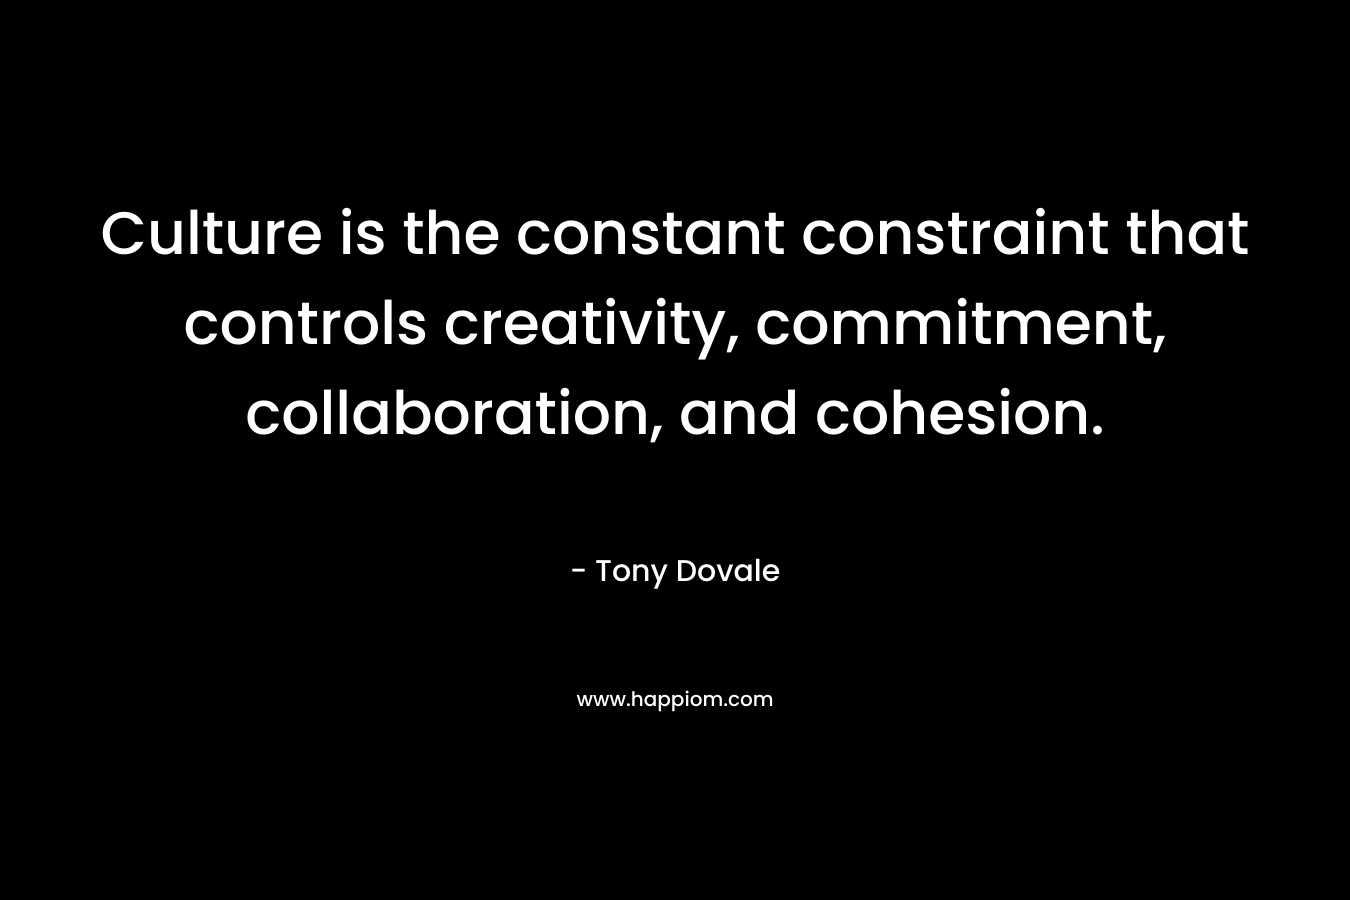 Culture is the constant constraint that controls creativity, commitment, collaboration, and cohesion.